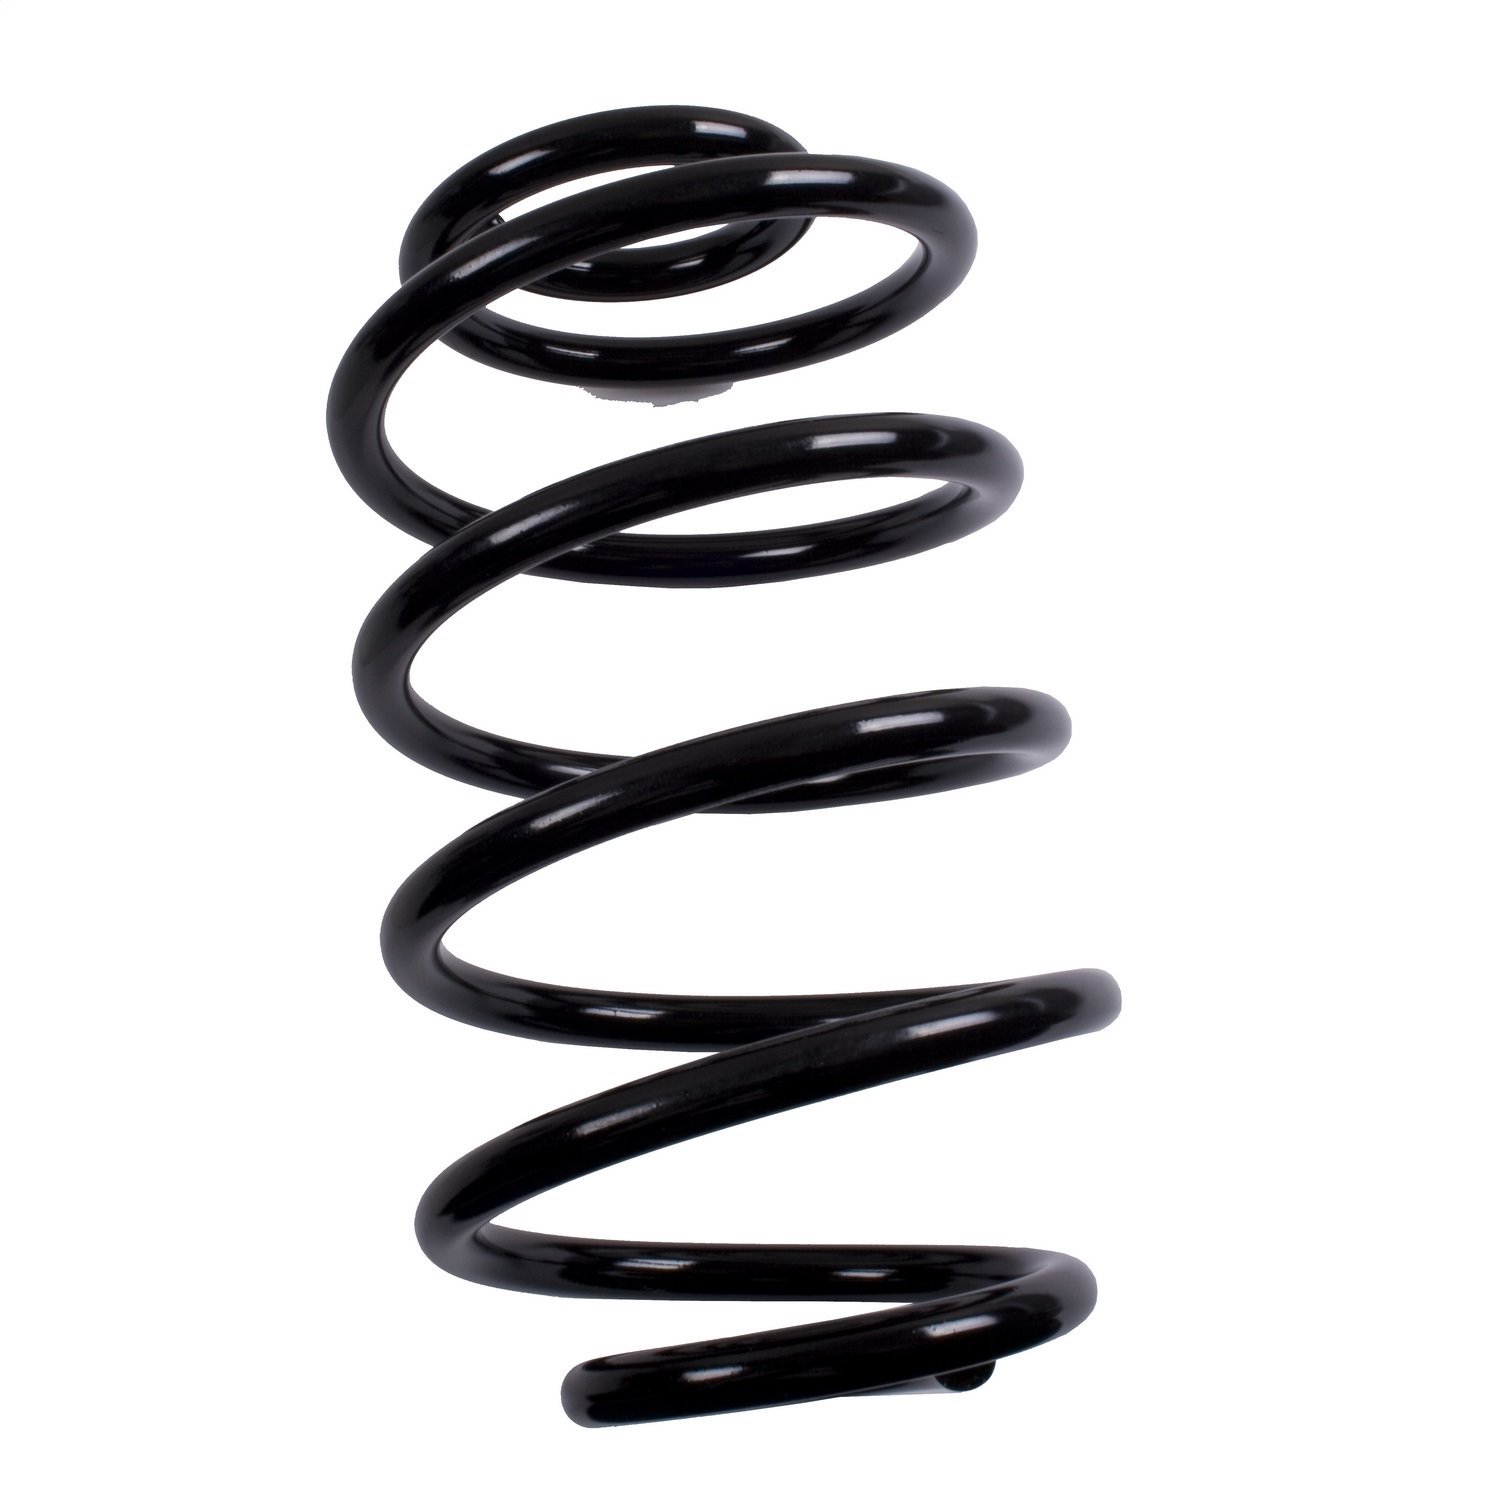 Stock replacement rear coil spring from Omix-ADA, Fits 97-06 Jeep Wrangler TJ